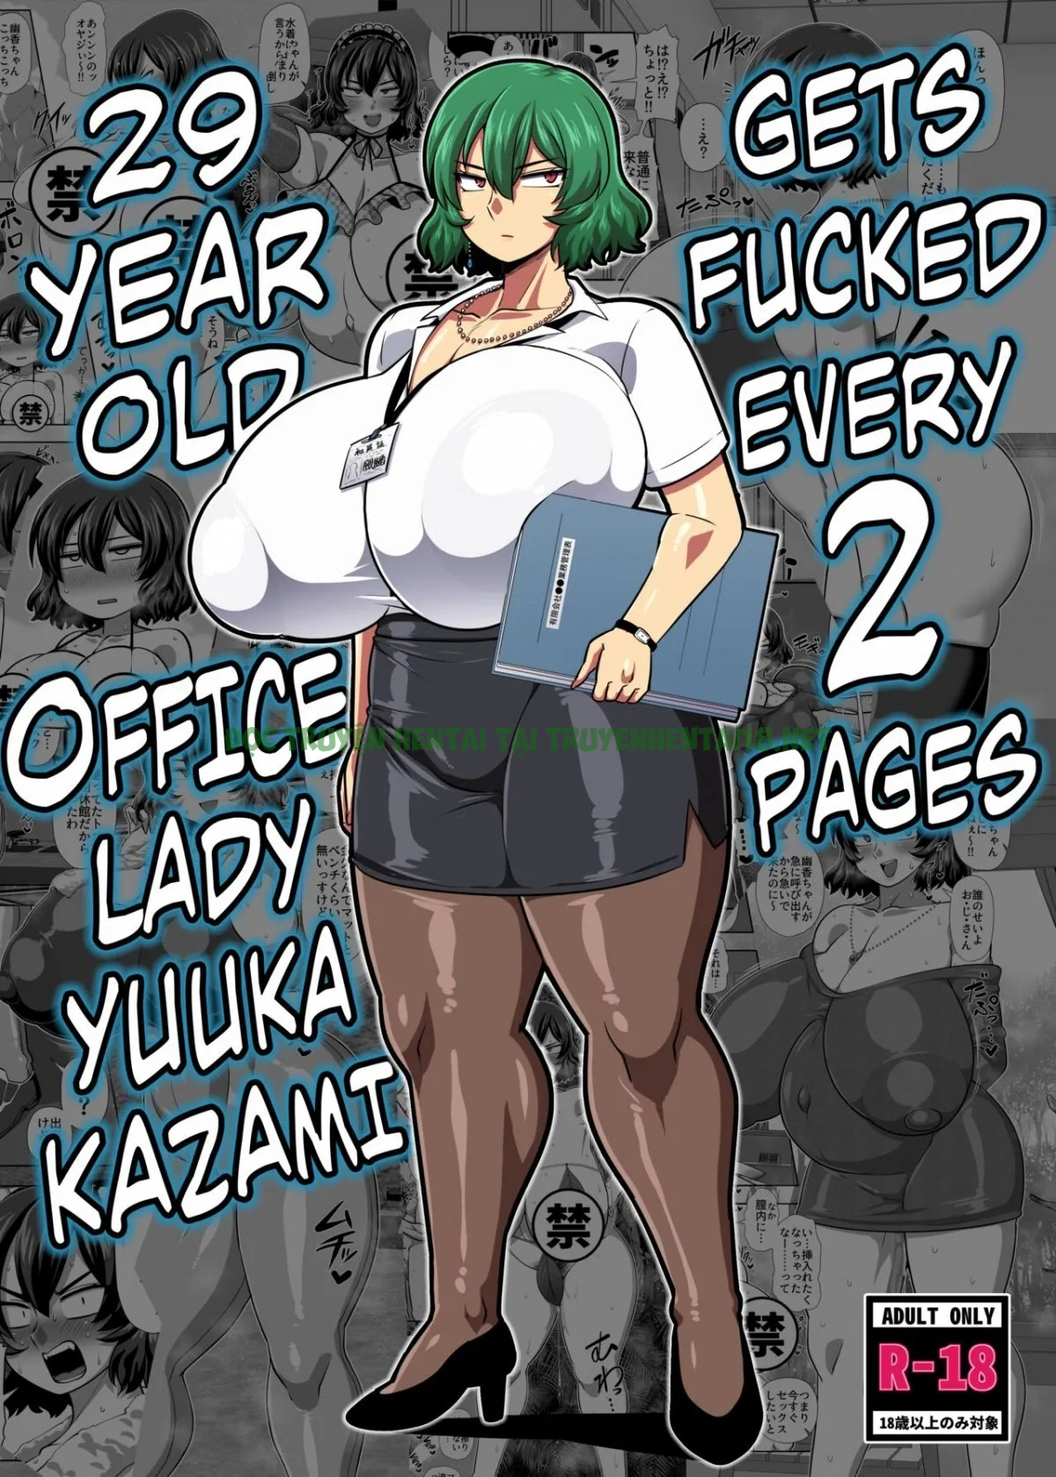 Hình ảnh 2 trong 29 Year Old Office Lady Yuuka Kazami Gets Fucked Every 2 Pages - One Shot - Hentaimanhwa.net